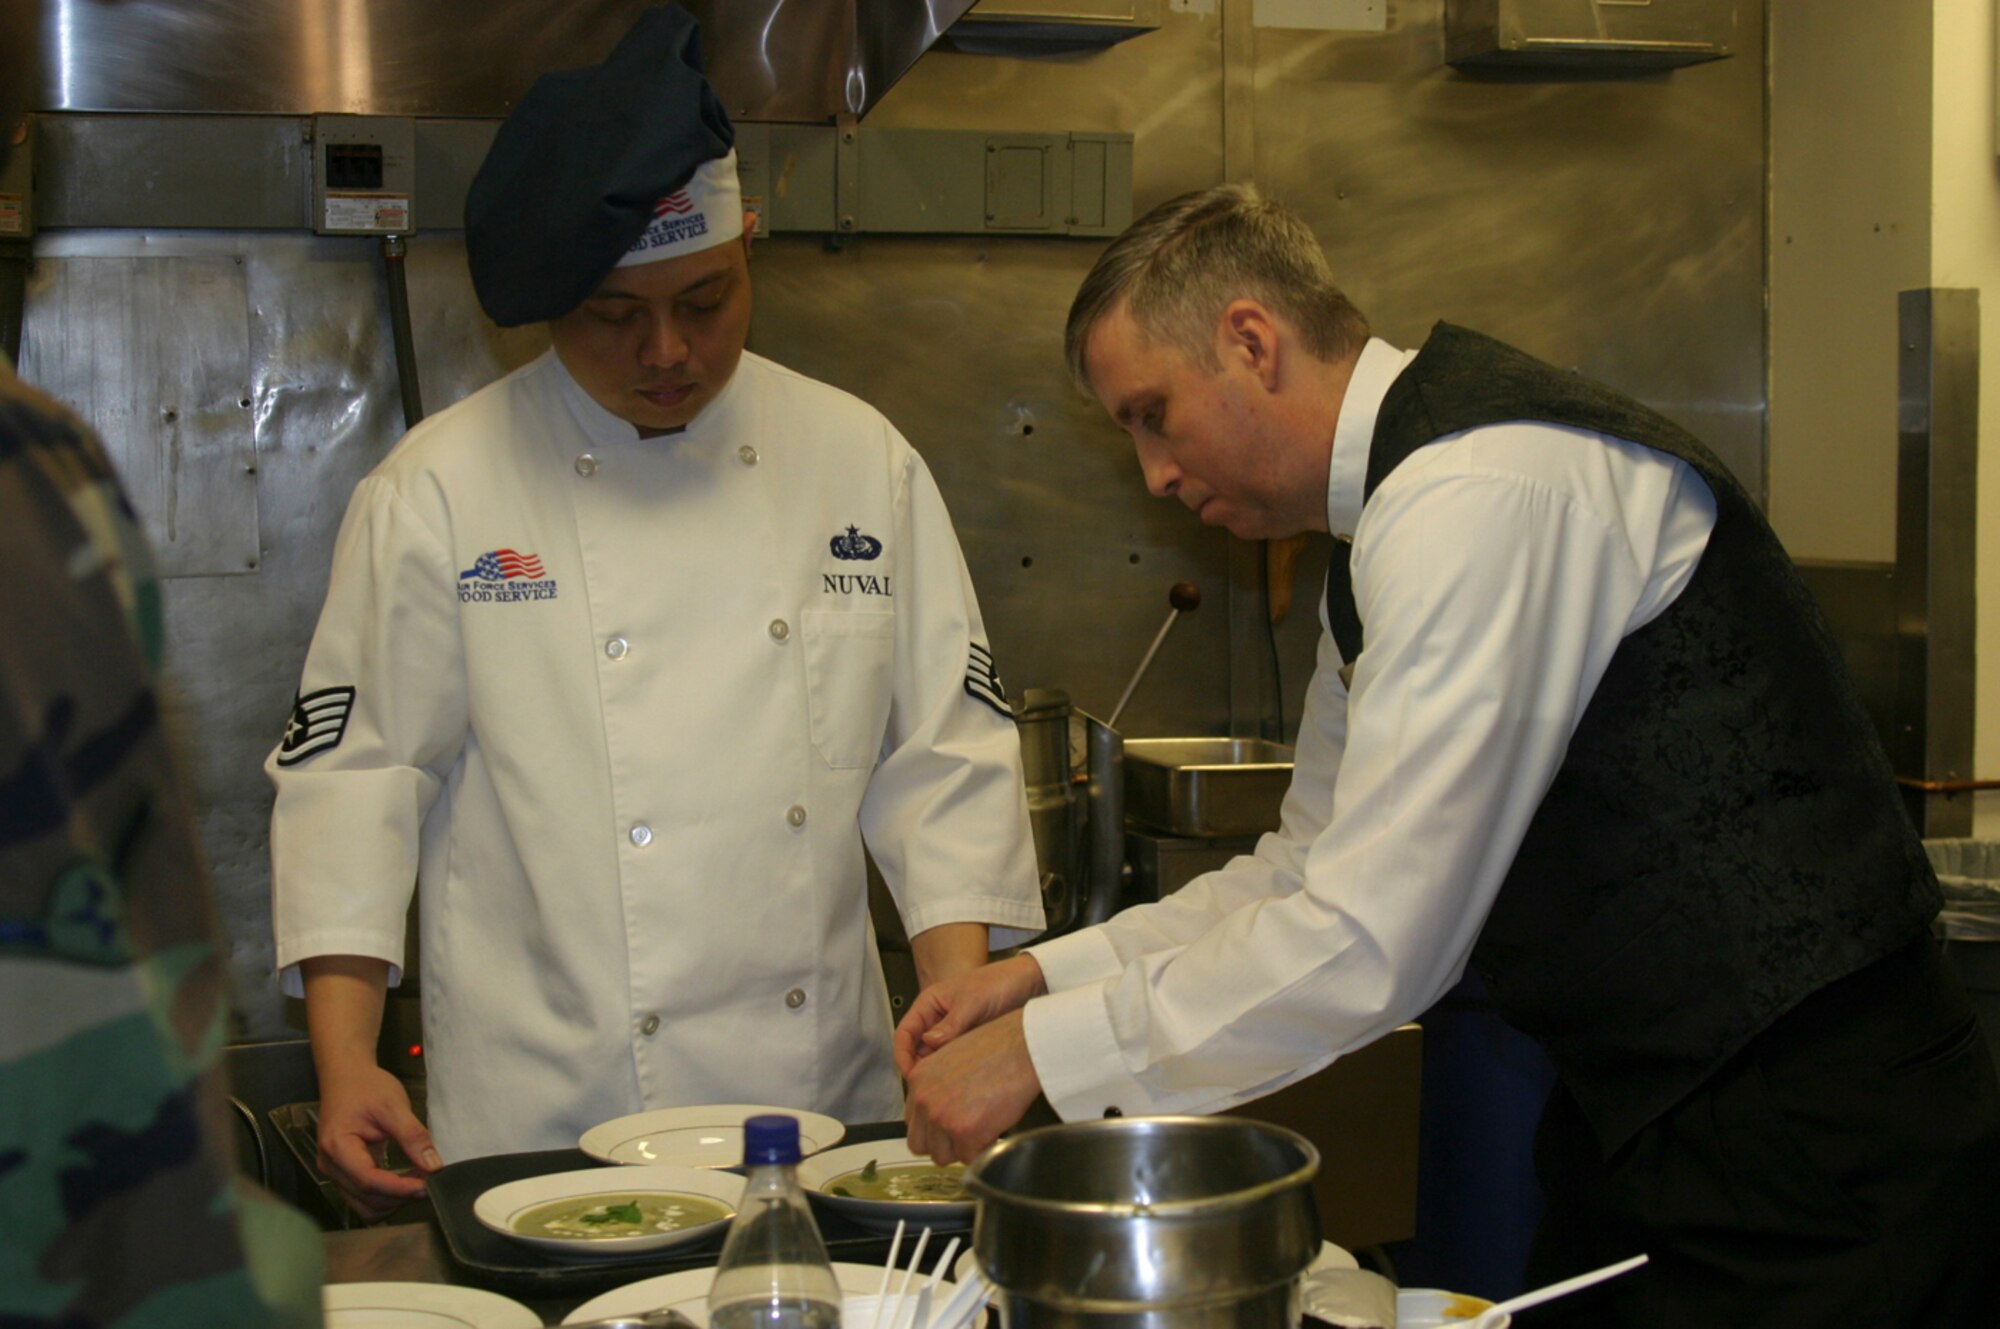 Serving as a sous-chef for Tech. Wesley Williams, Nuval and his mentor, shown here in 2007, made a dish that earned a spot on Emeril Live. This year, Nuval and his culinary team earned an award at the Military Culinary Competition in Washington D.C. Sept. 25. (Courtesy photo)